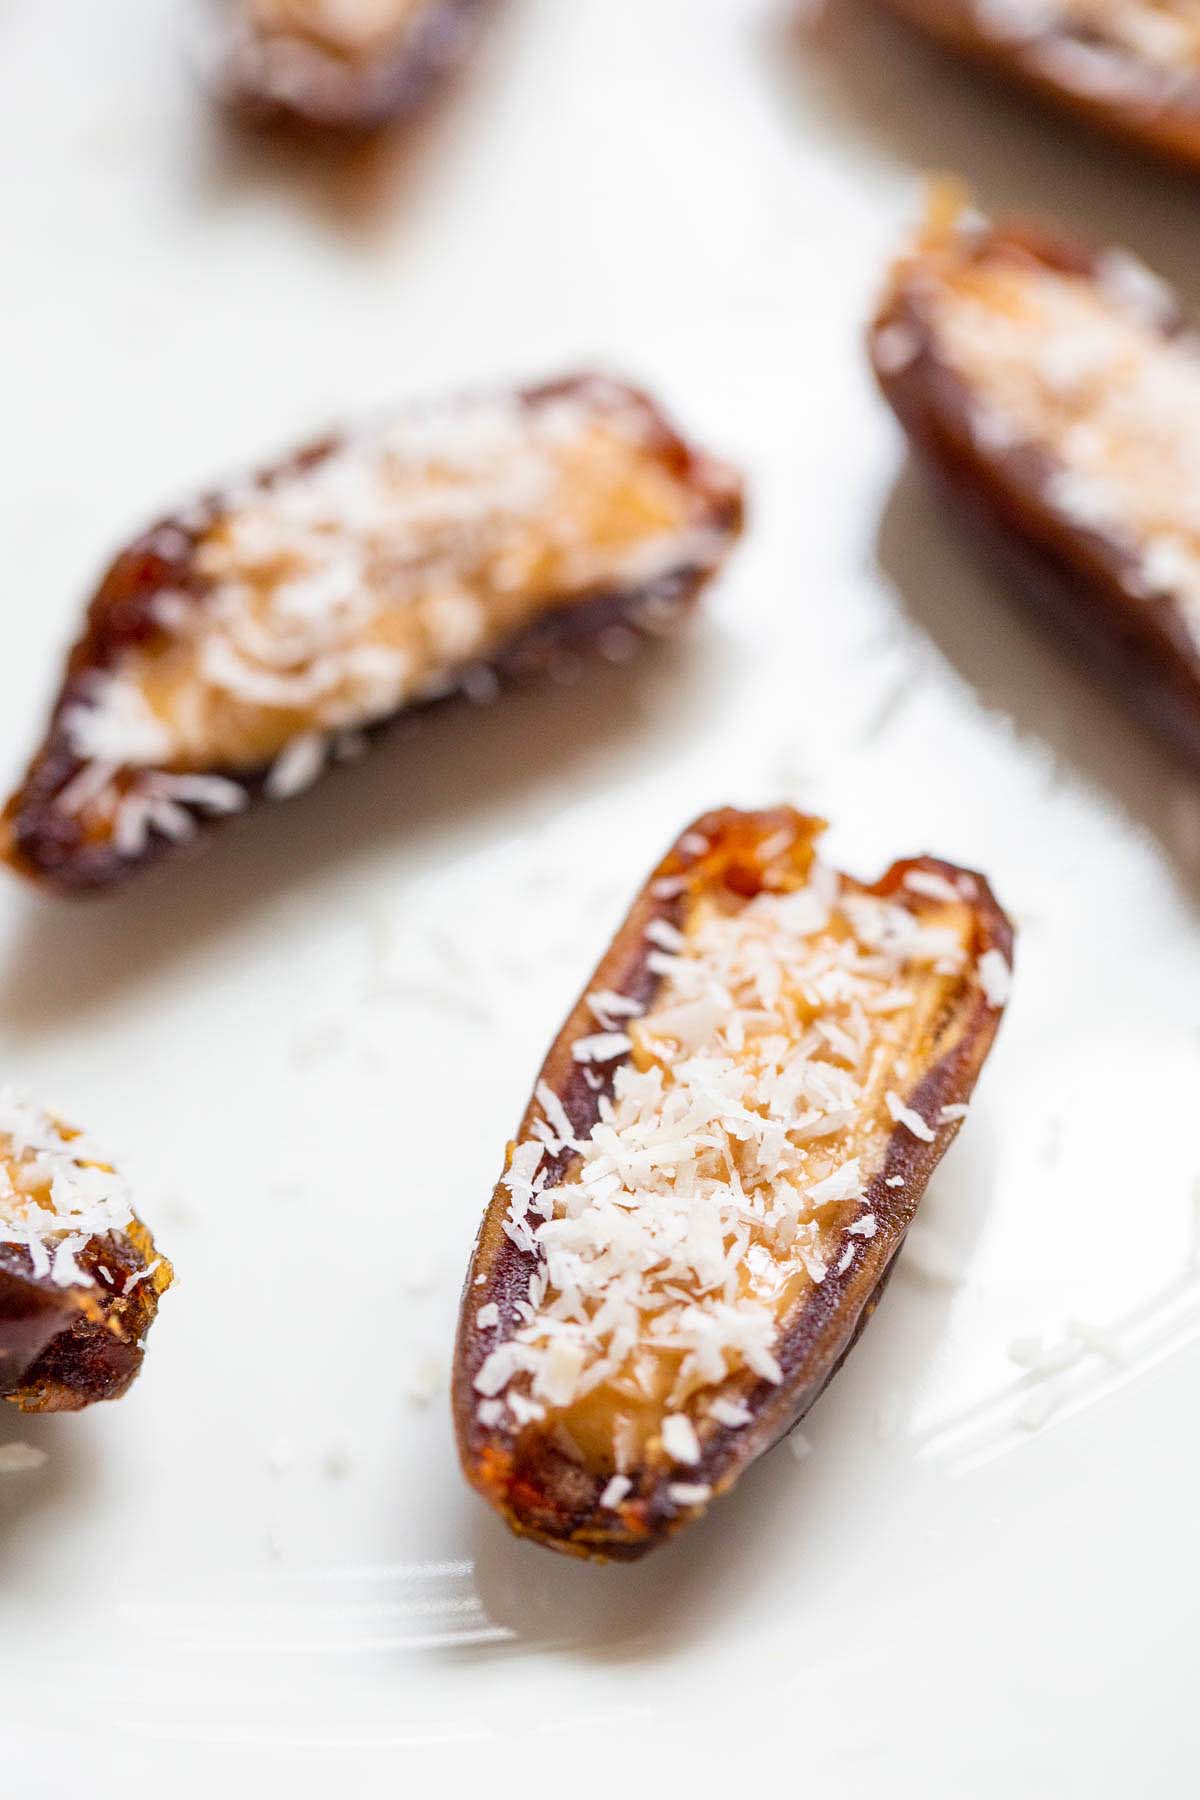 dates up close with peanut butter and coconut.